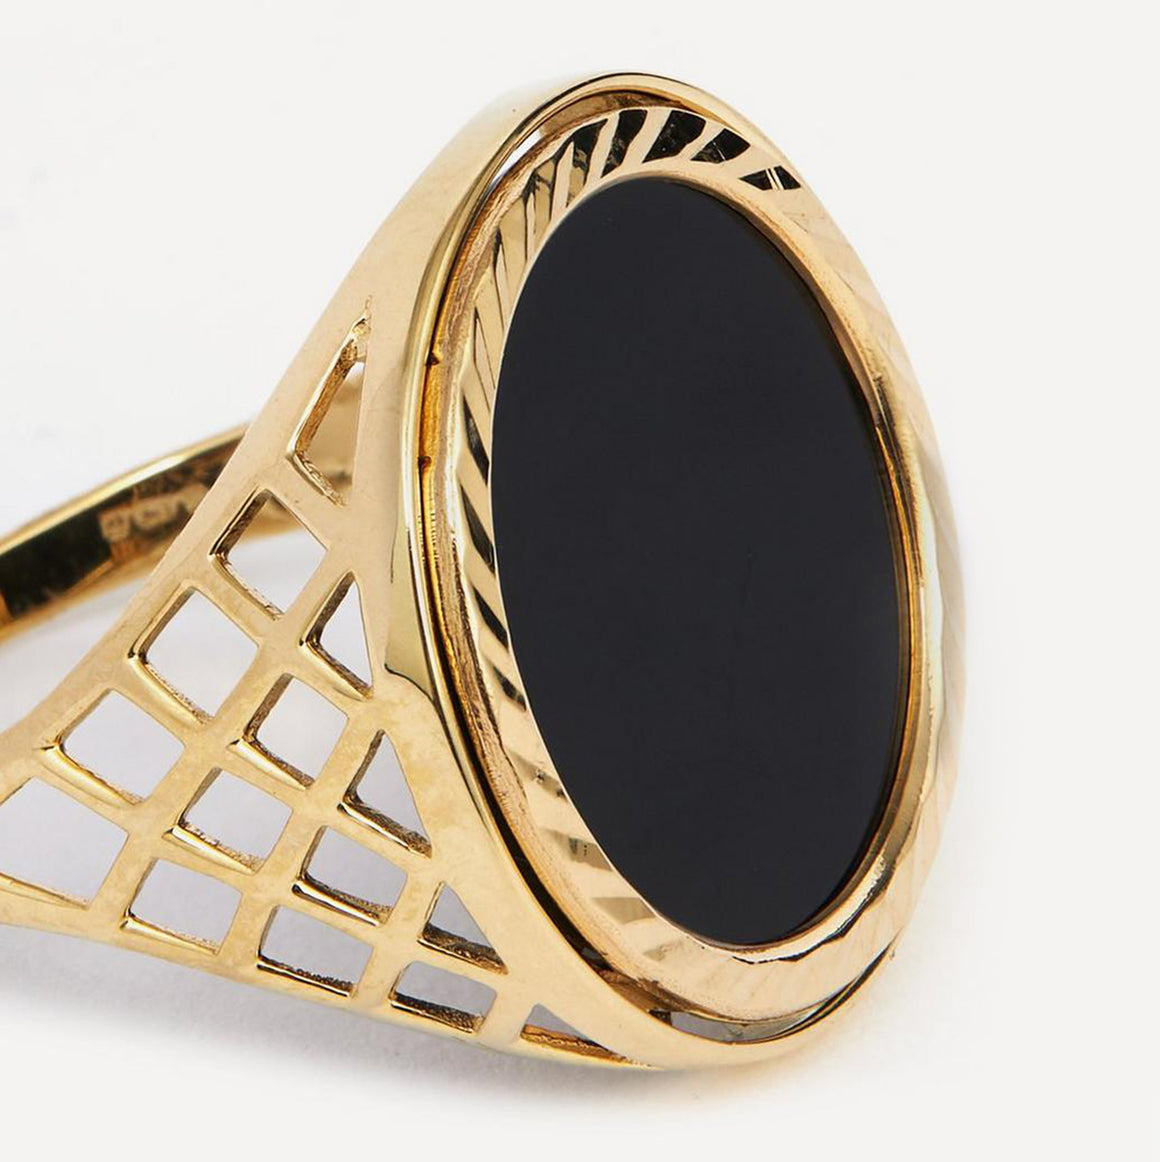 54 FLORAL 9ct GOLD 375 ONYX ELEMENT FACE SOVEREIGN SIGNET RING